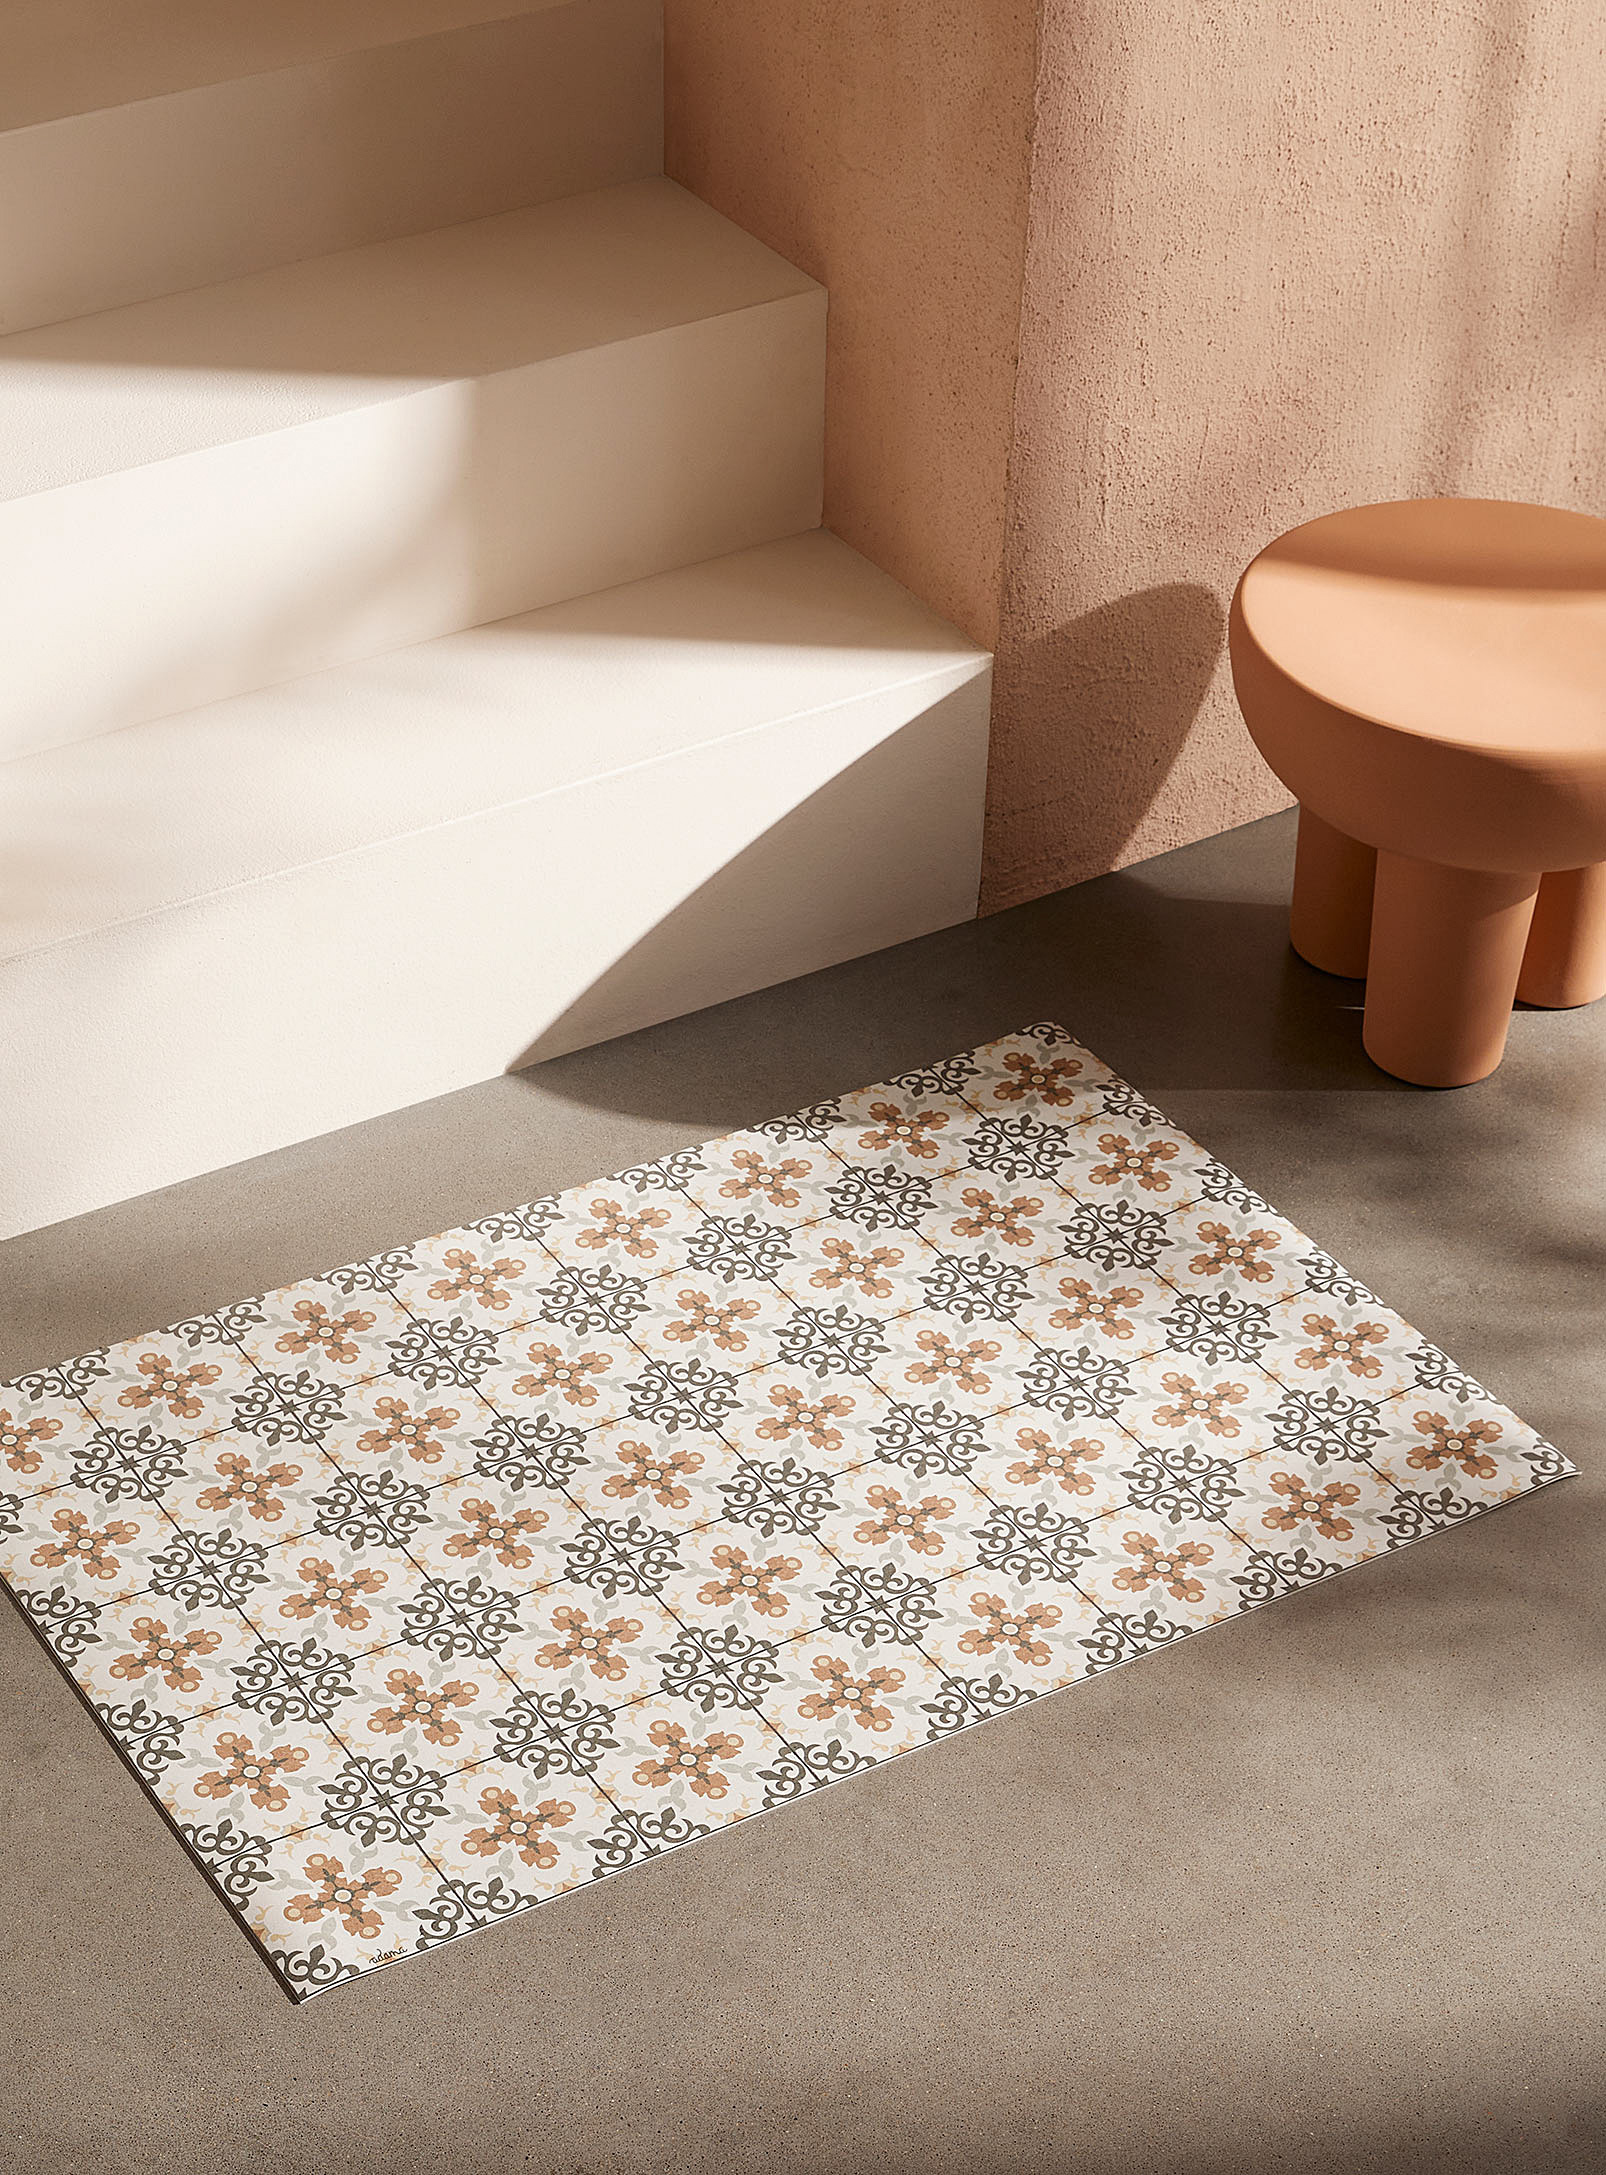 Adama Floral Mosaic Vinyl Mat See Available Sizes In Assorted